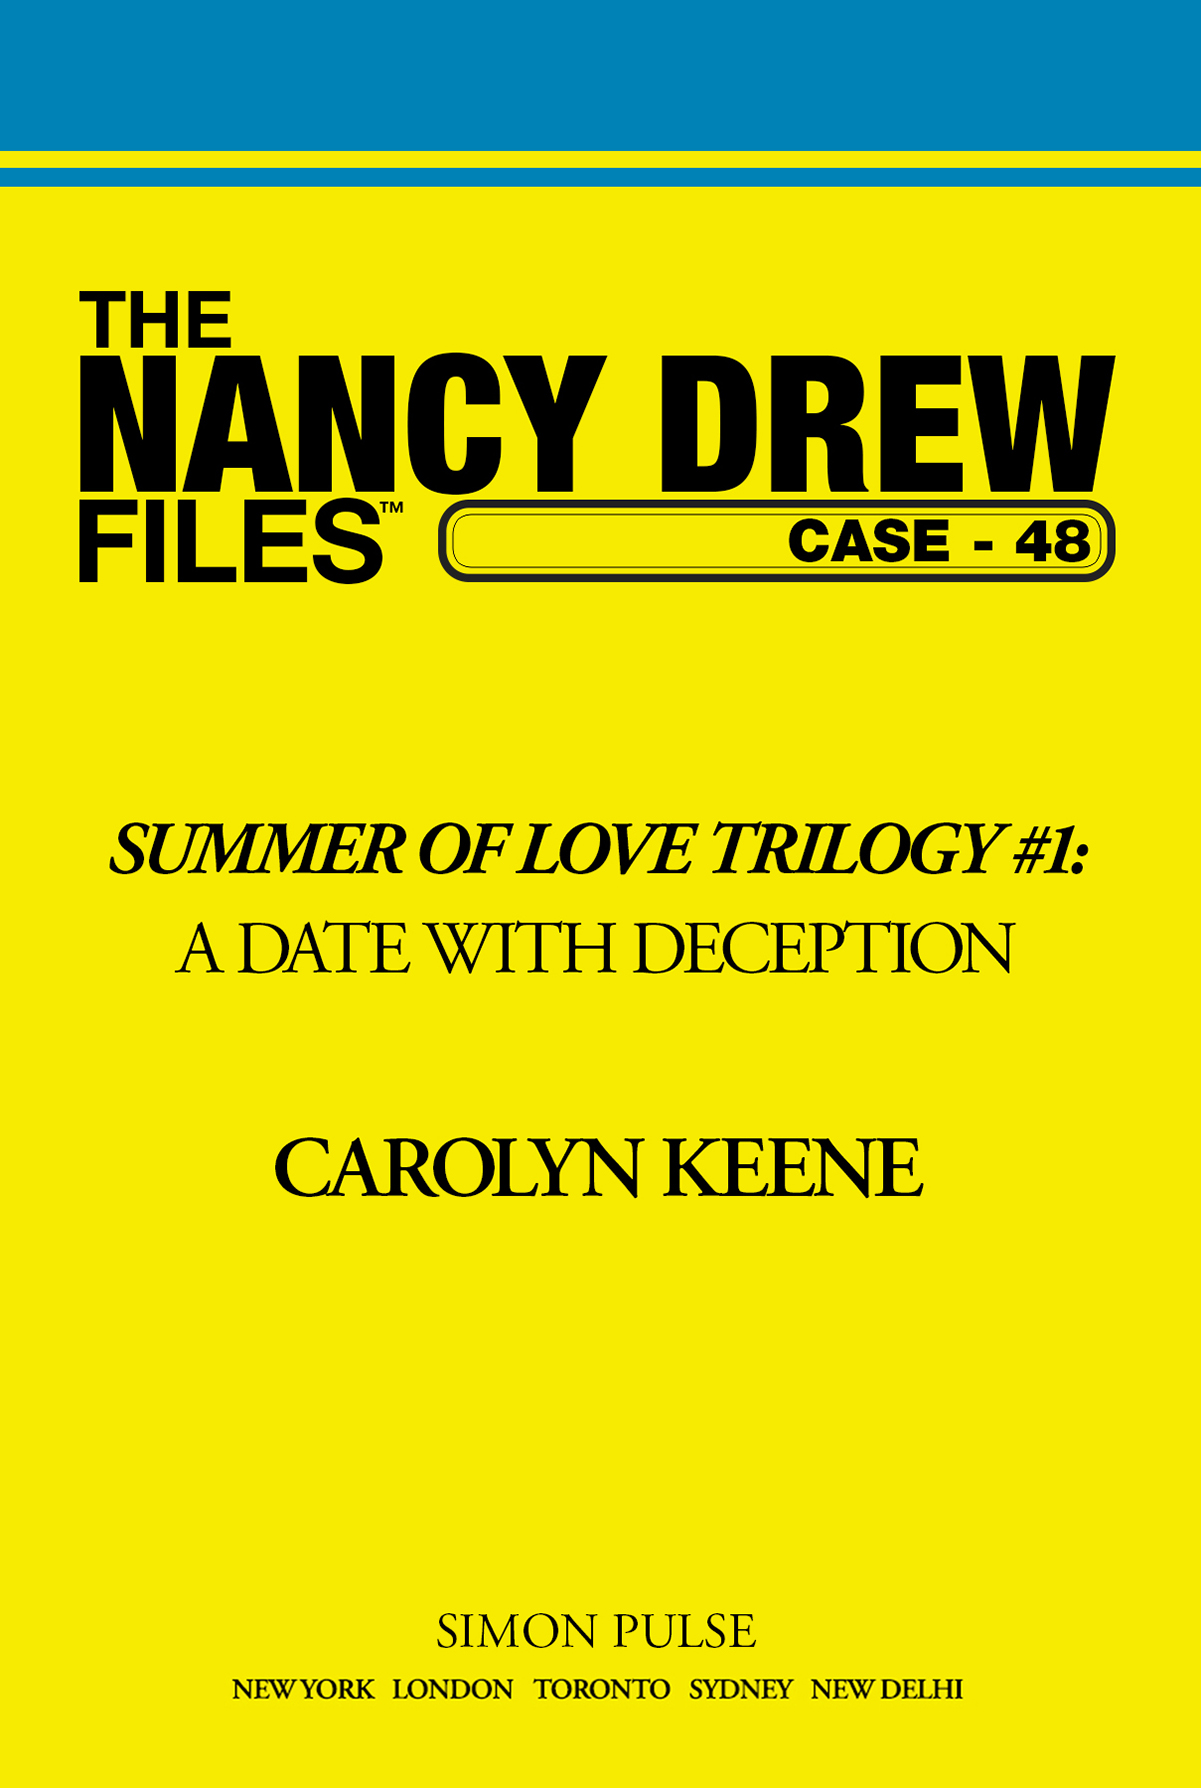 A Date with Deception by Carolyn Keene